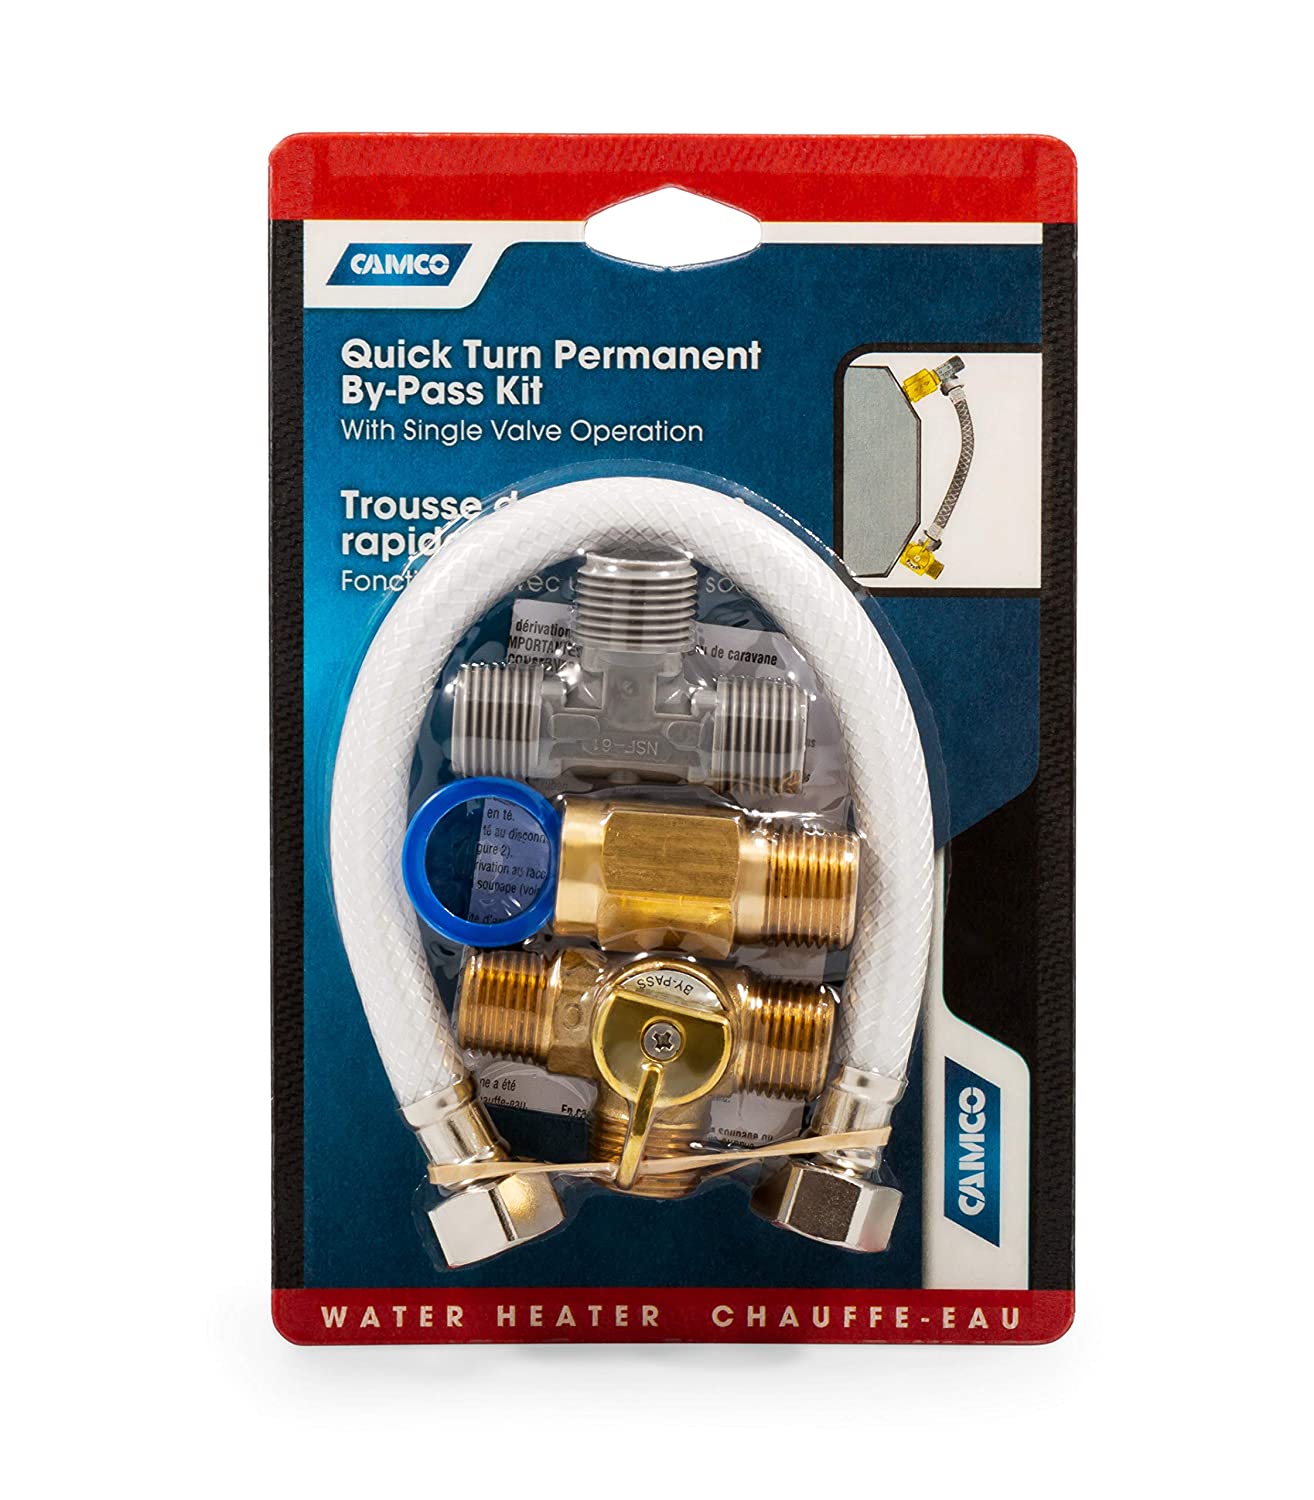 Camco 35983 Quick Turn Permanent By-Pass Kit - Lead Free